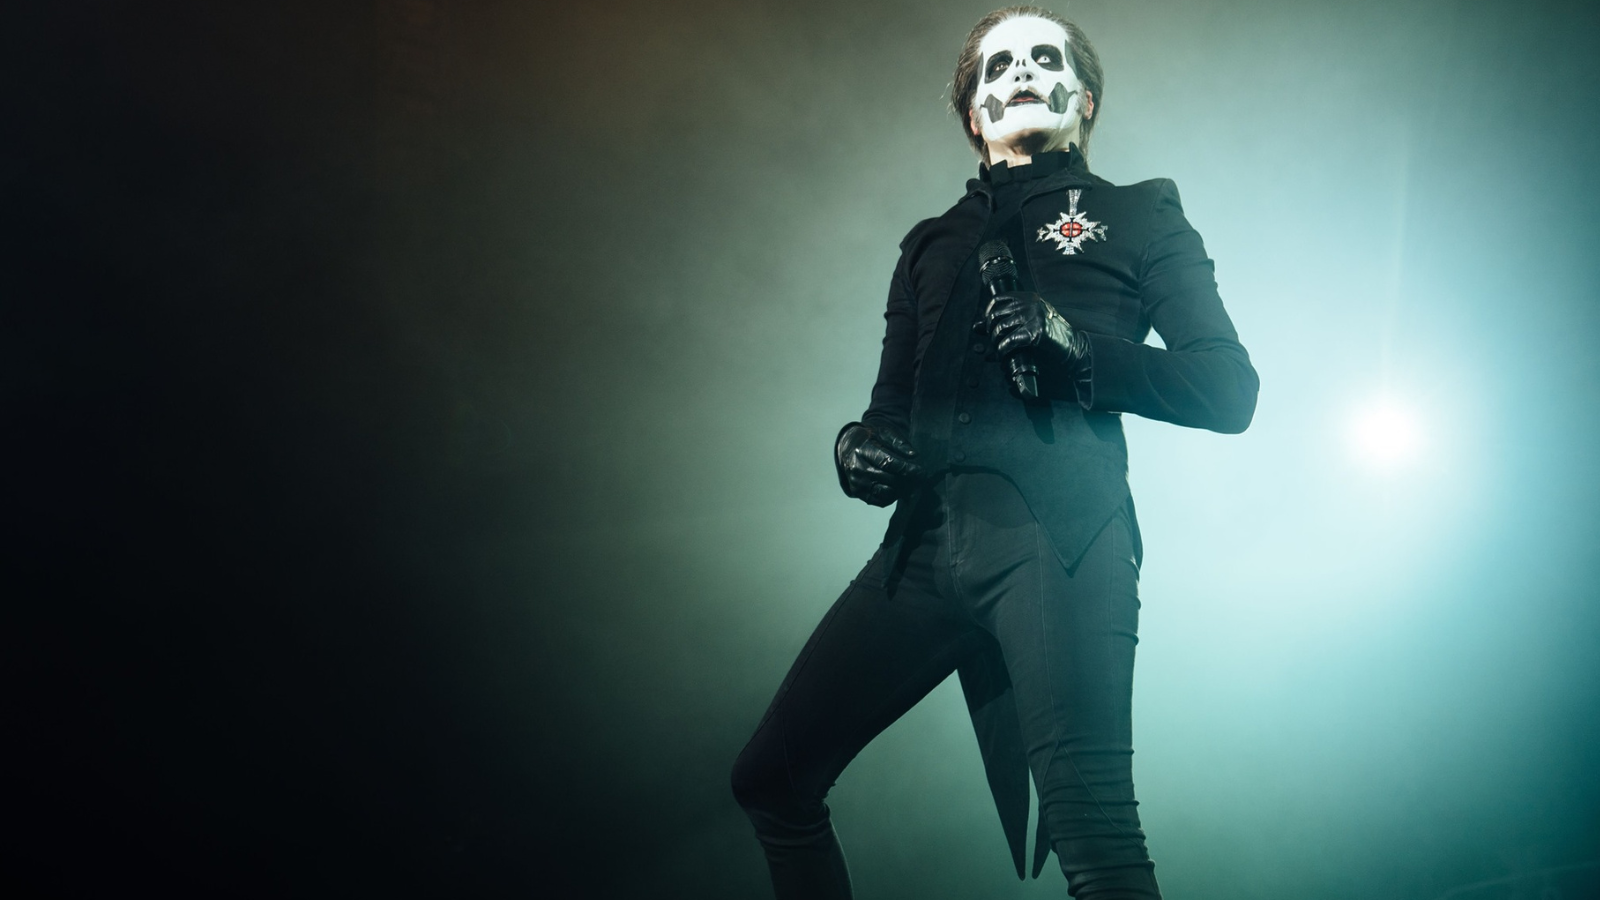 Tobias Forge says that a big part of Ghost's touring success is their merch